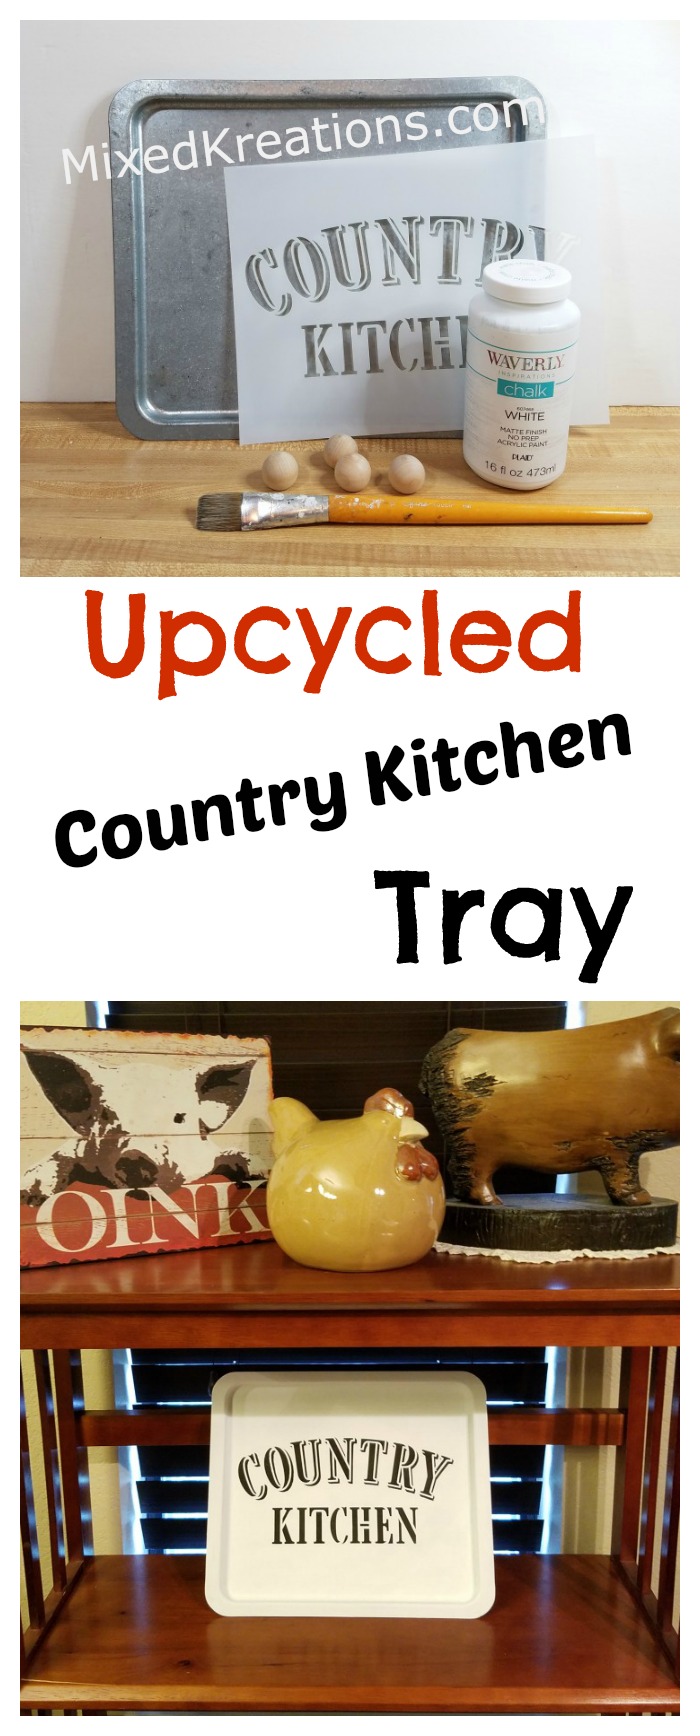 Upcycled country kitchen tray from thrifted item, farmhouse style tray, thrift store makeover,  country kitchen, diy, repurposed,  upcycled, MixedKreations.com 